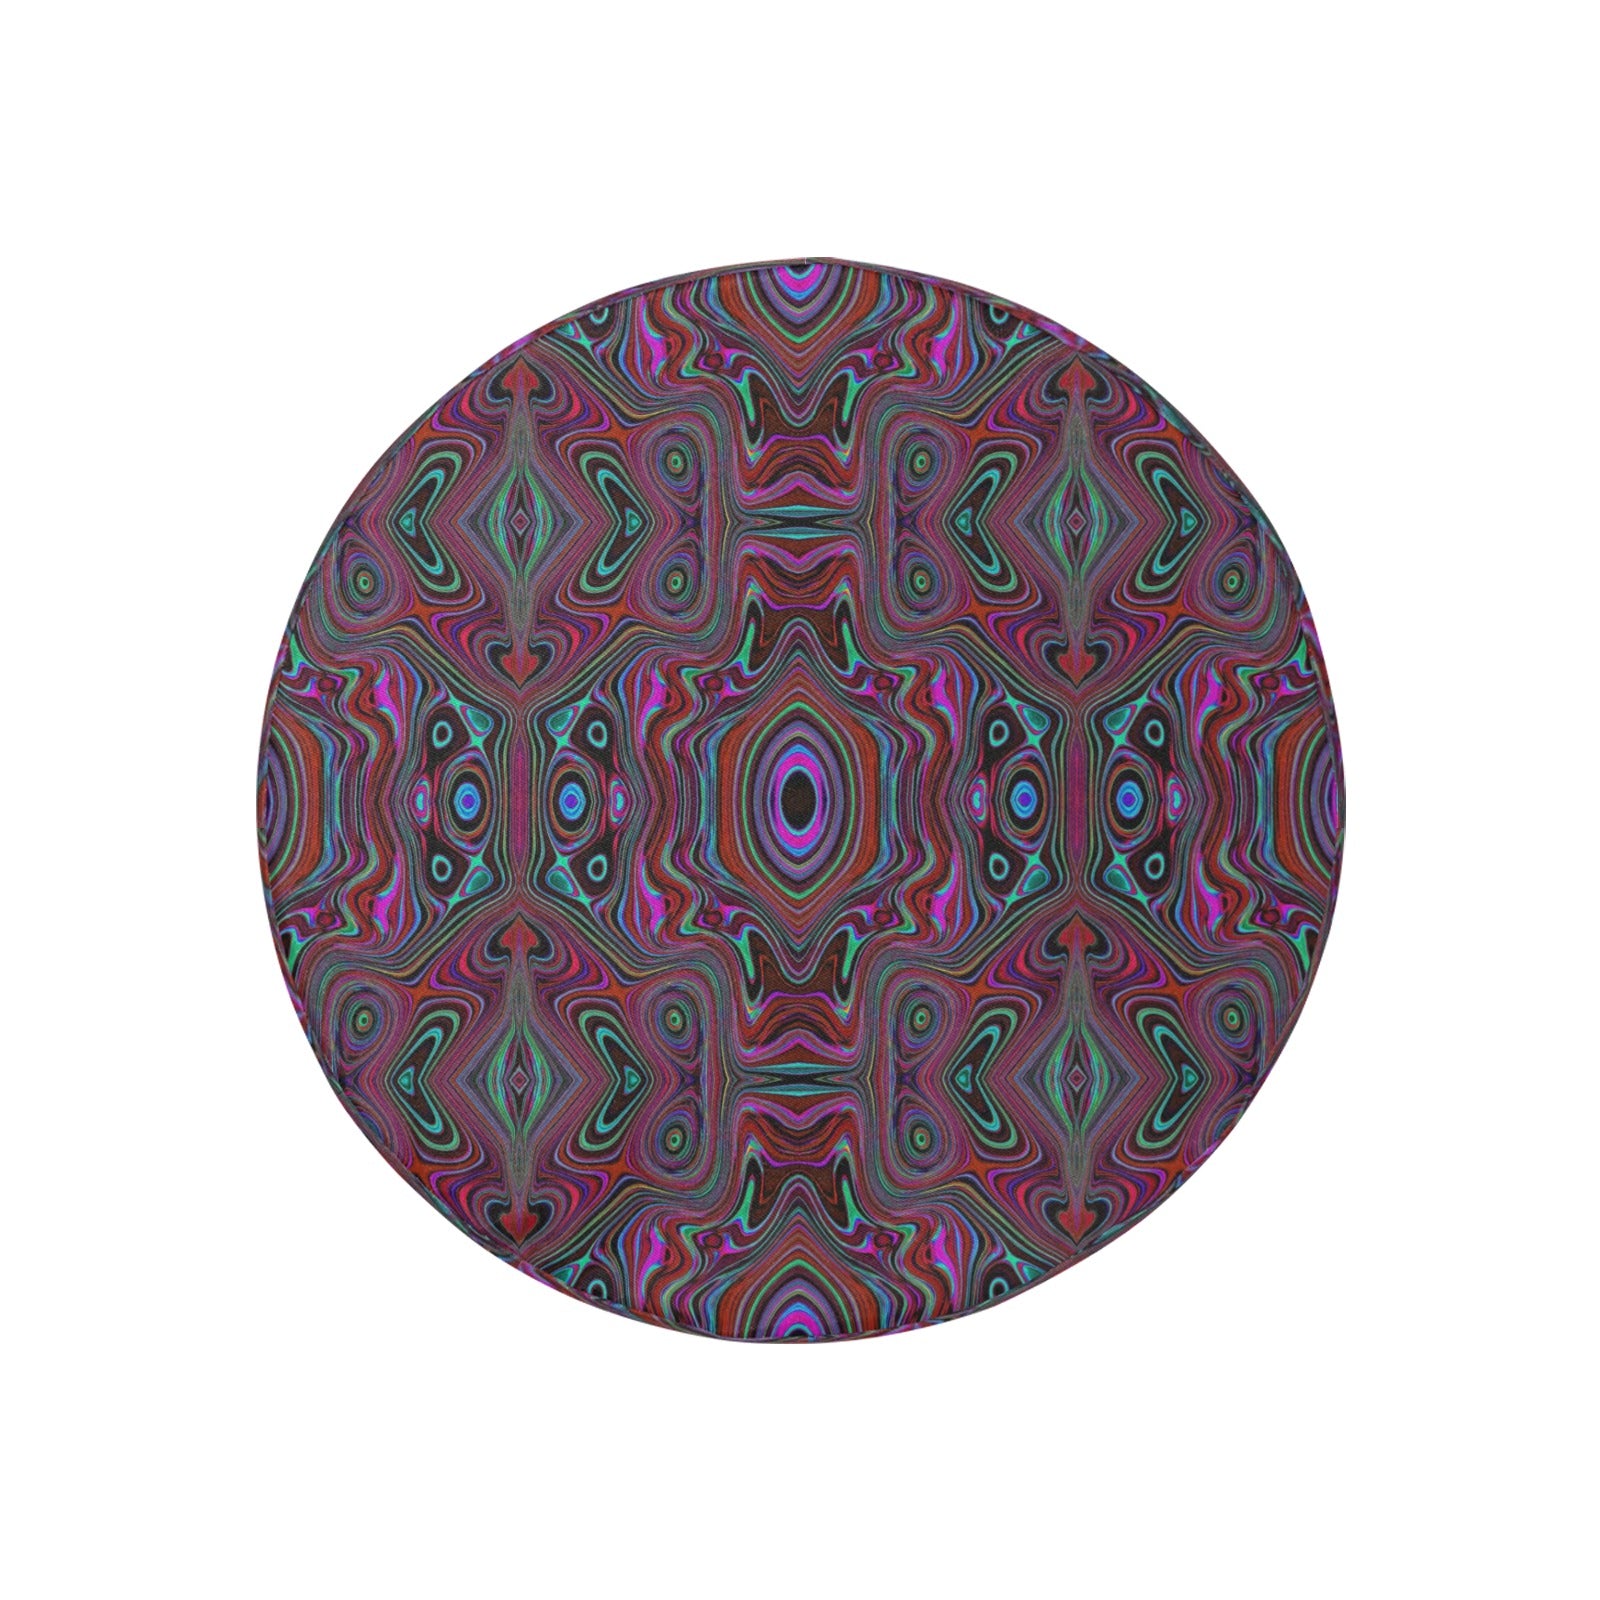 Spare Tire Covers, Trippy Seafoam Green and Magenta Abstract Pattern - Small